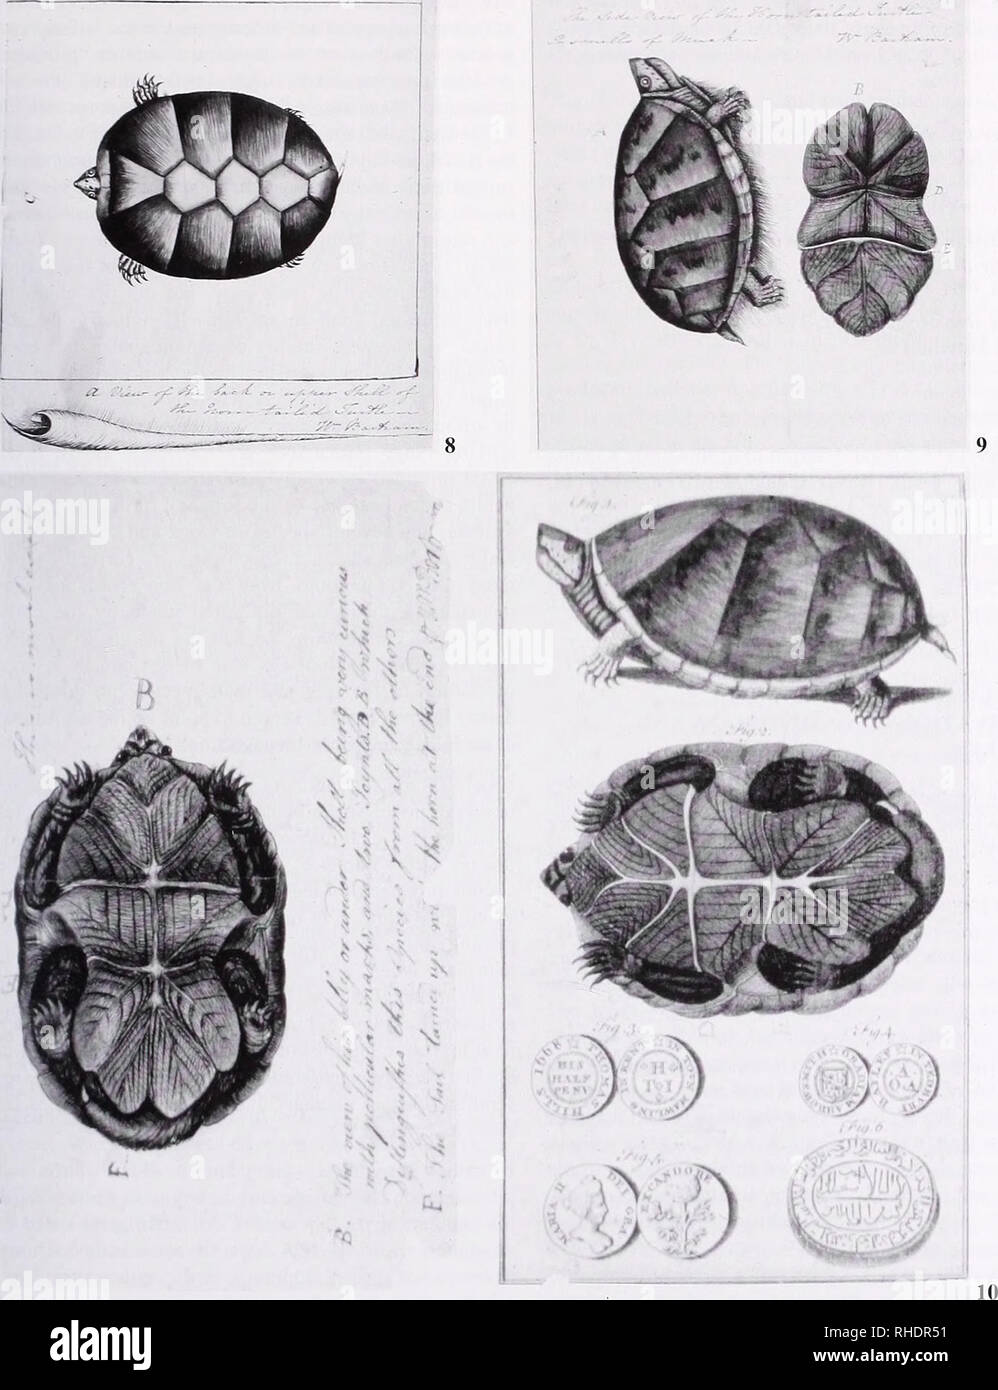 . Bonner zoologische Beiträge : Herausgeber: Zoologisches Forschungsinstitut und Museum Alexander Koenig, Bonn. Biology; Zoology. Kraig Adler: William Bartram's Travels in Southeastern United States (1773-1776) 285. Figs. 8-10: Mud Turtle, Kinostemon suhnibnim. The drawings in Fig. 8-9 are rather lifeless, but that in Fig. 10 (left) is quite good; Bartram wrote &quot;This is most exact&quot; at the top). These provided the basis for the engraving published by COLLINSON (1758a); see Fig. 7. However, a com- parison of the originals to the published version shows that Bartram's watercolors were m Stock Photo